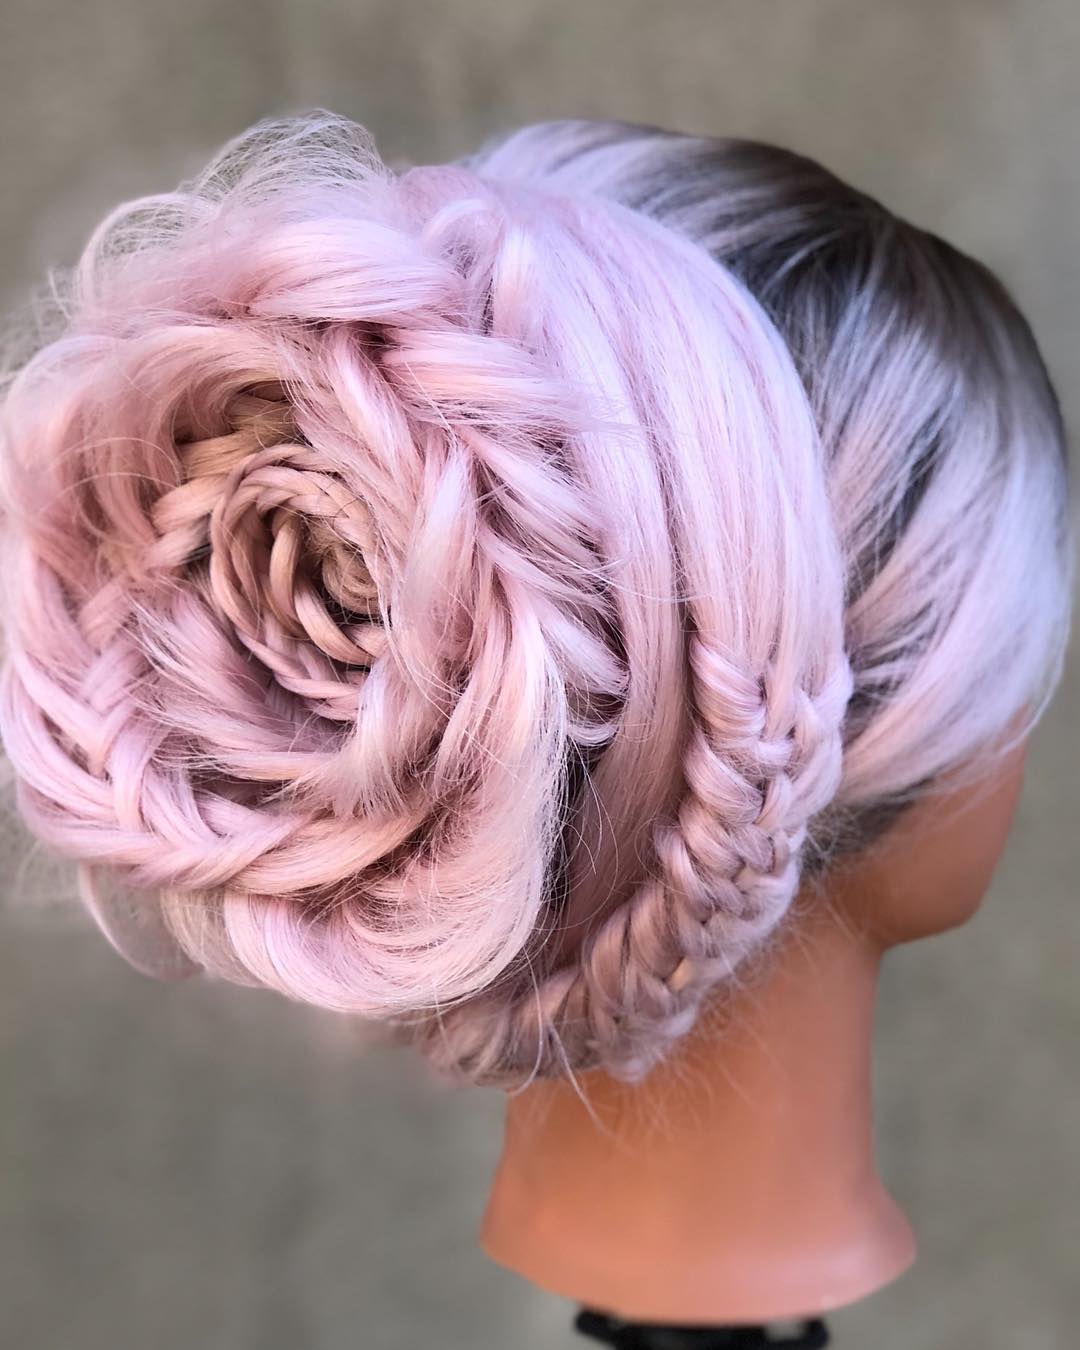 Braided Rose Hairstyle Is the New Trend This Summer